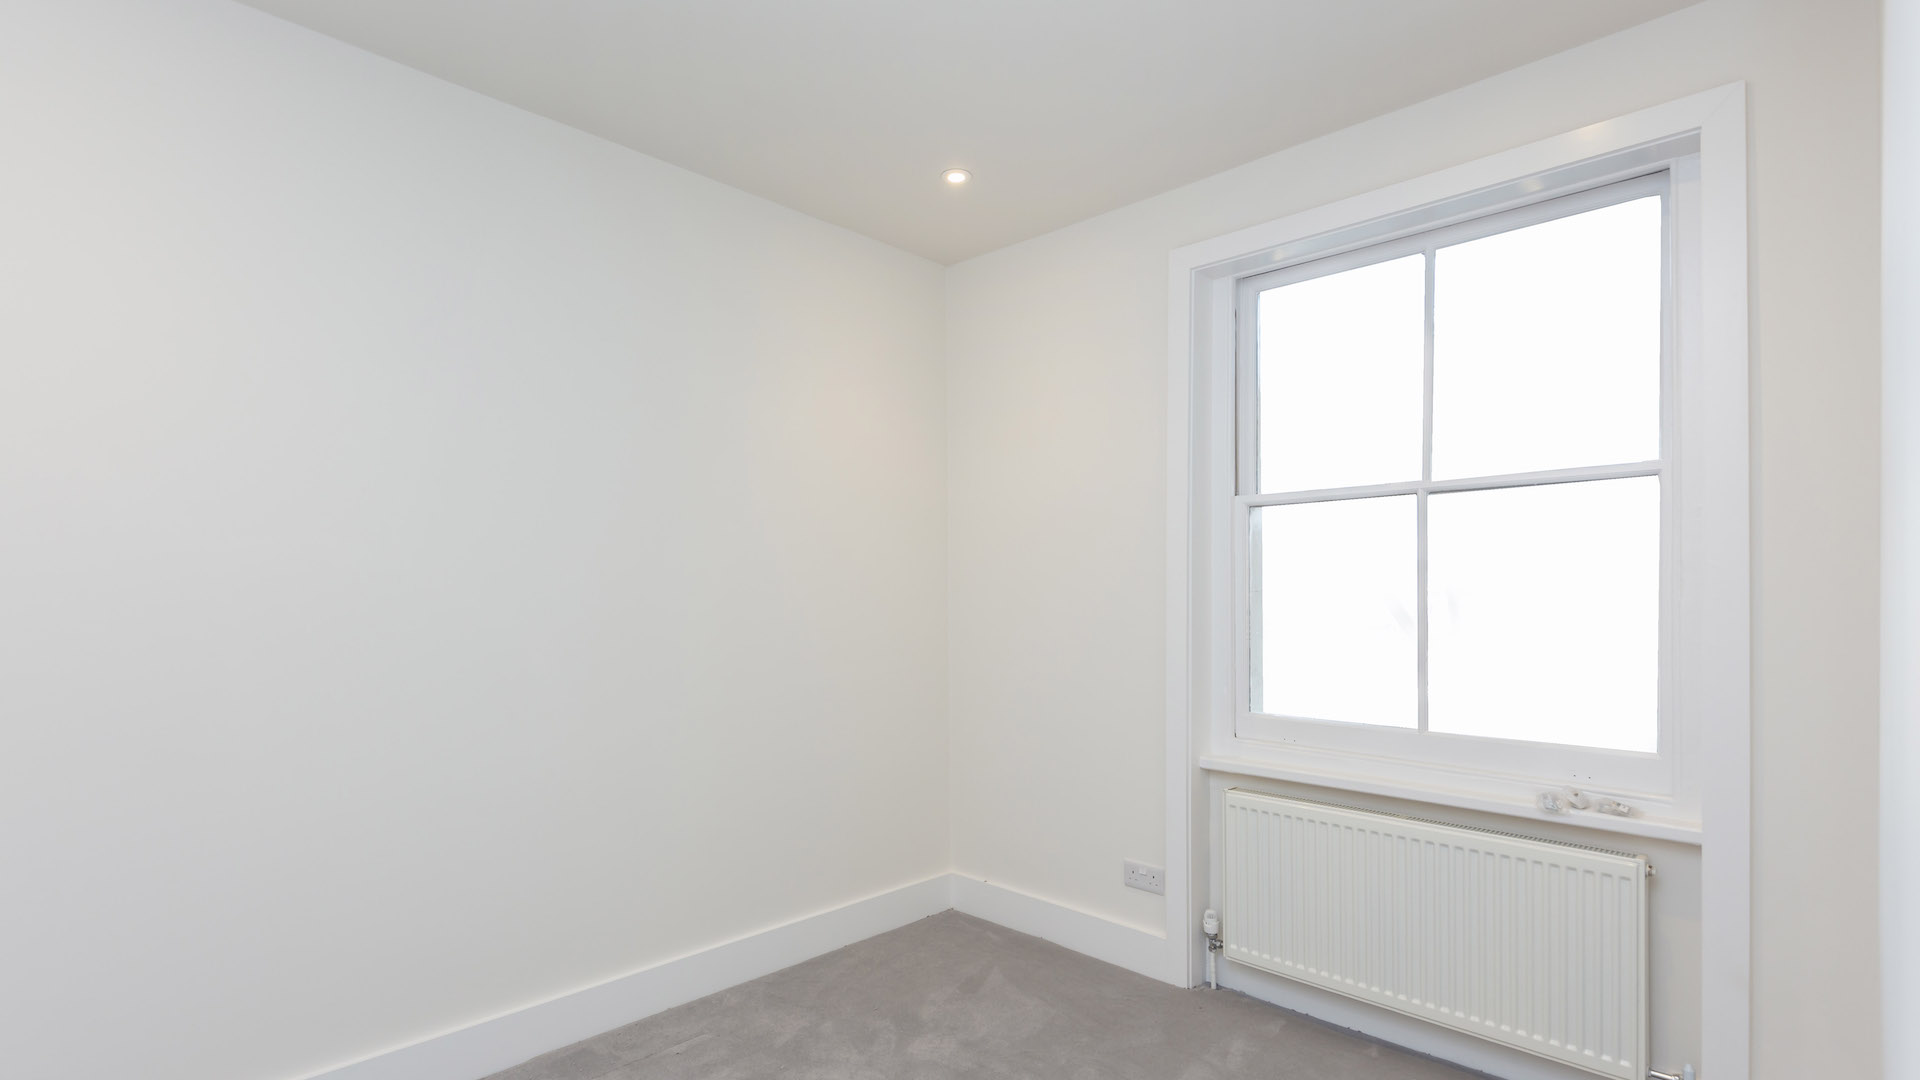 Recently renovated room with off-white walls, heater placed beneath a new window fitting.